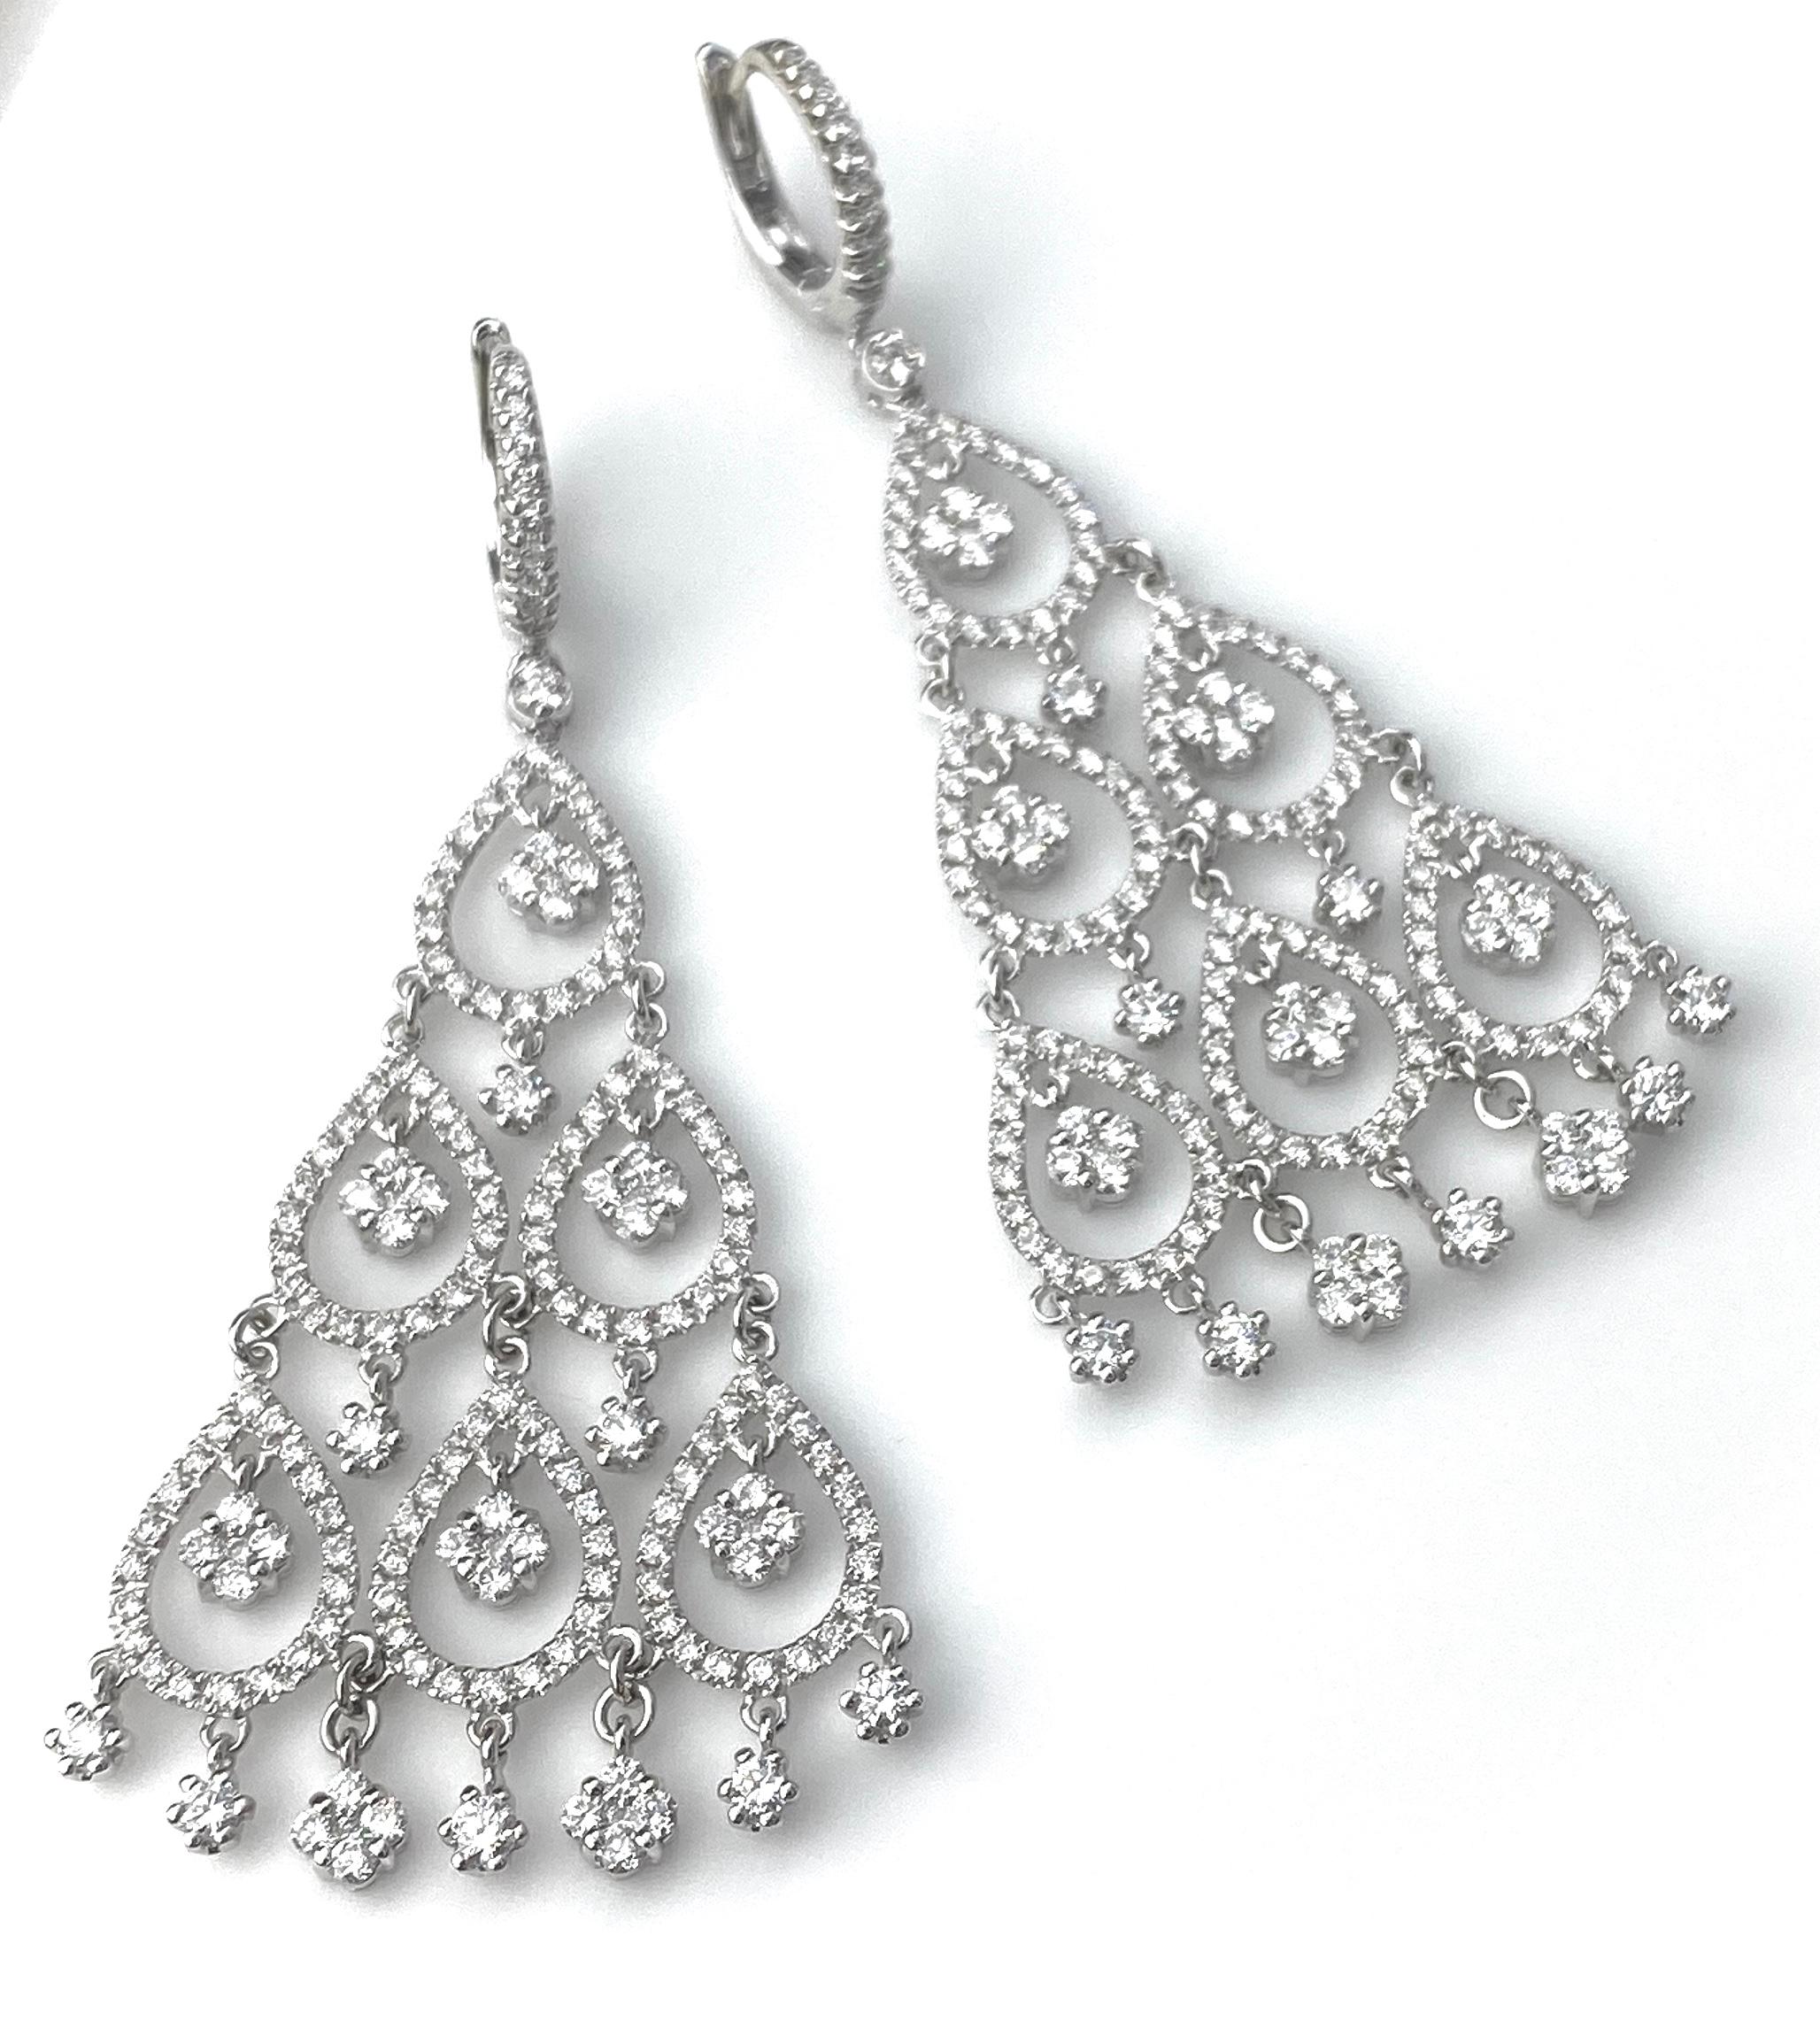 Ladies' Italian chandelier earrings in 18kt white gold with 4.14ct total of micro-set diamonds. Made in Italy.